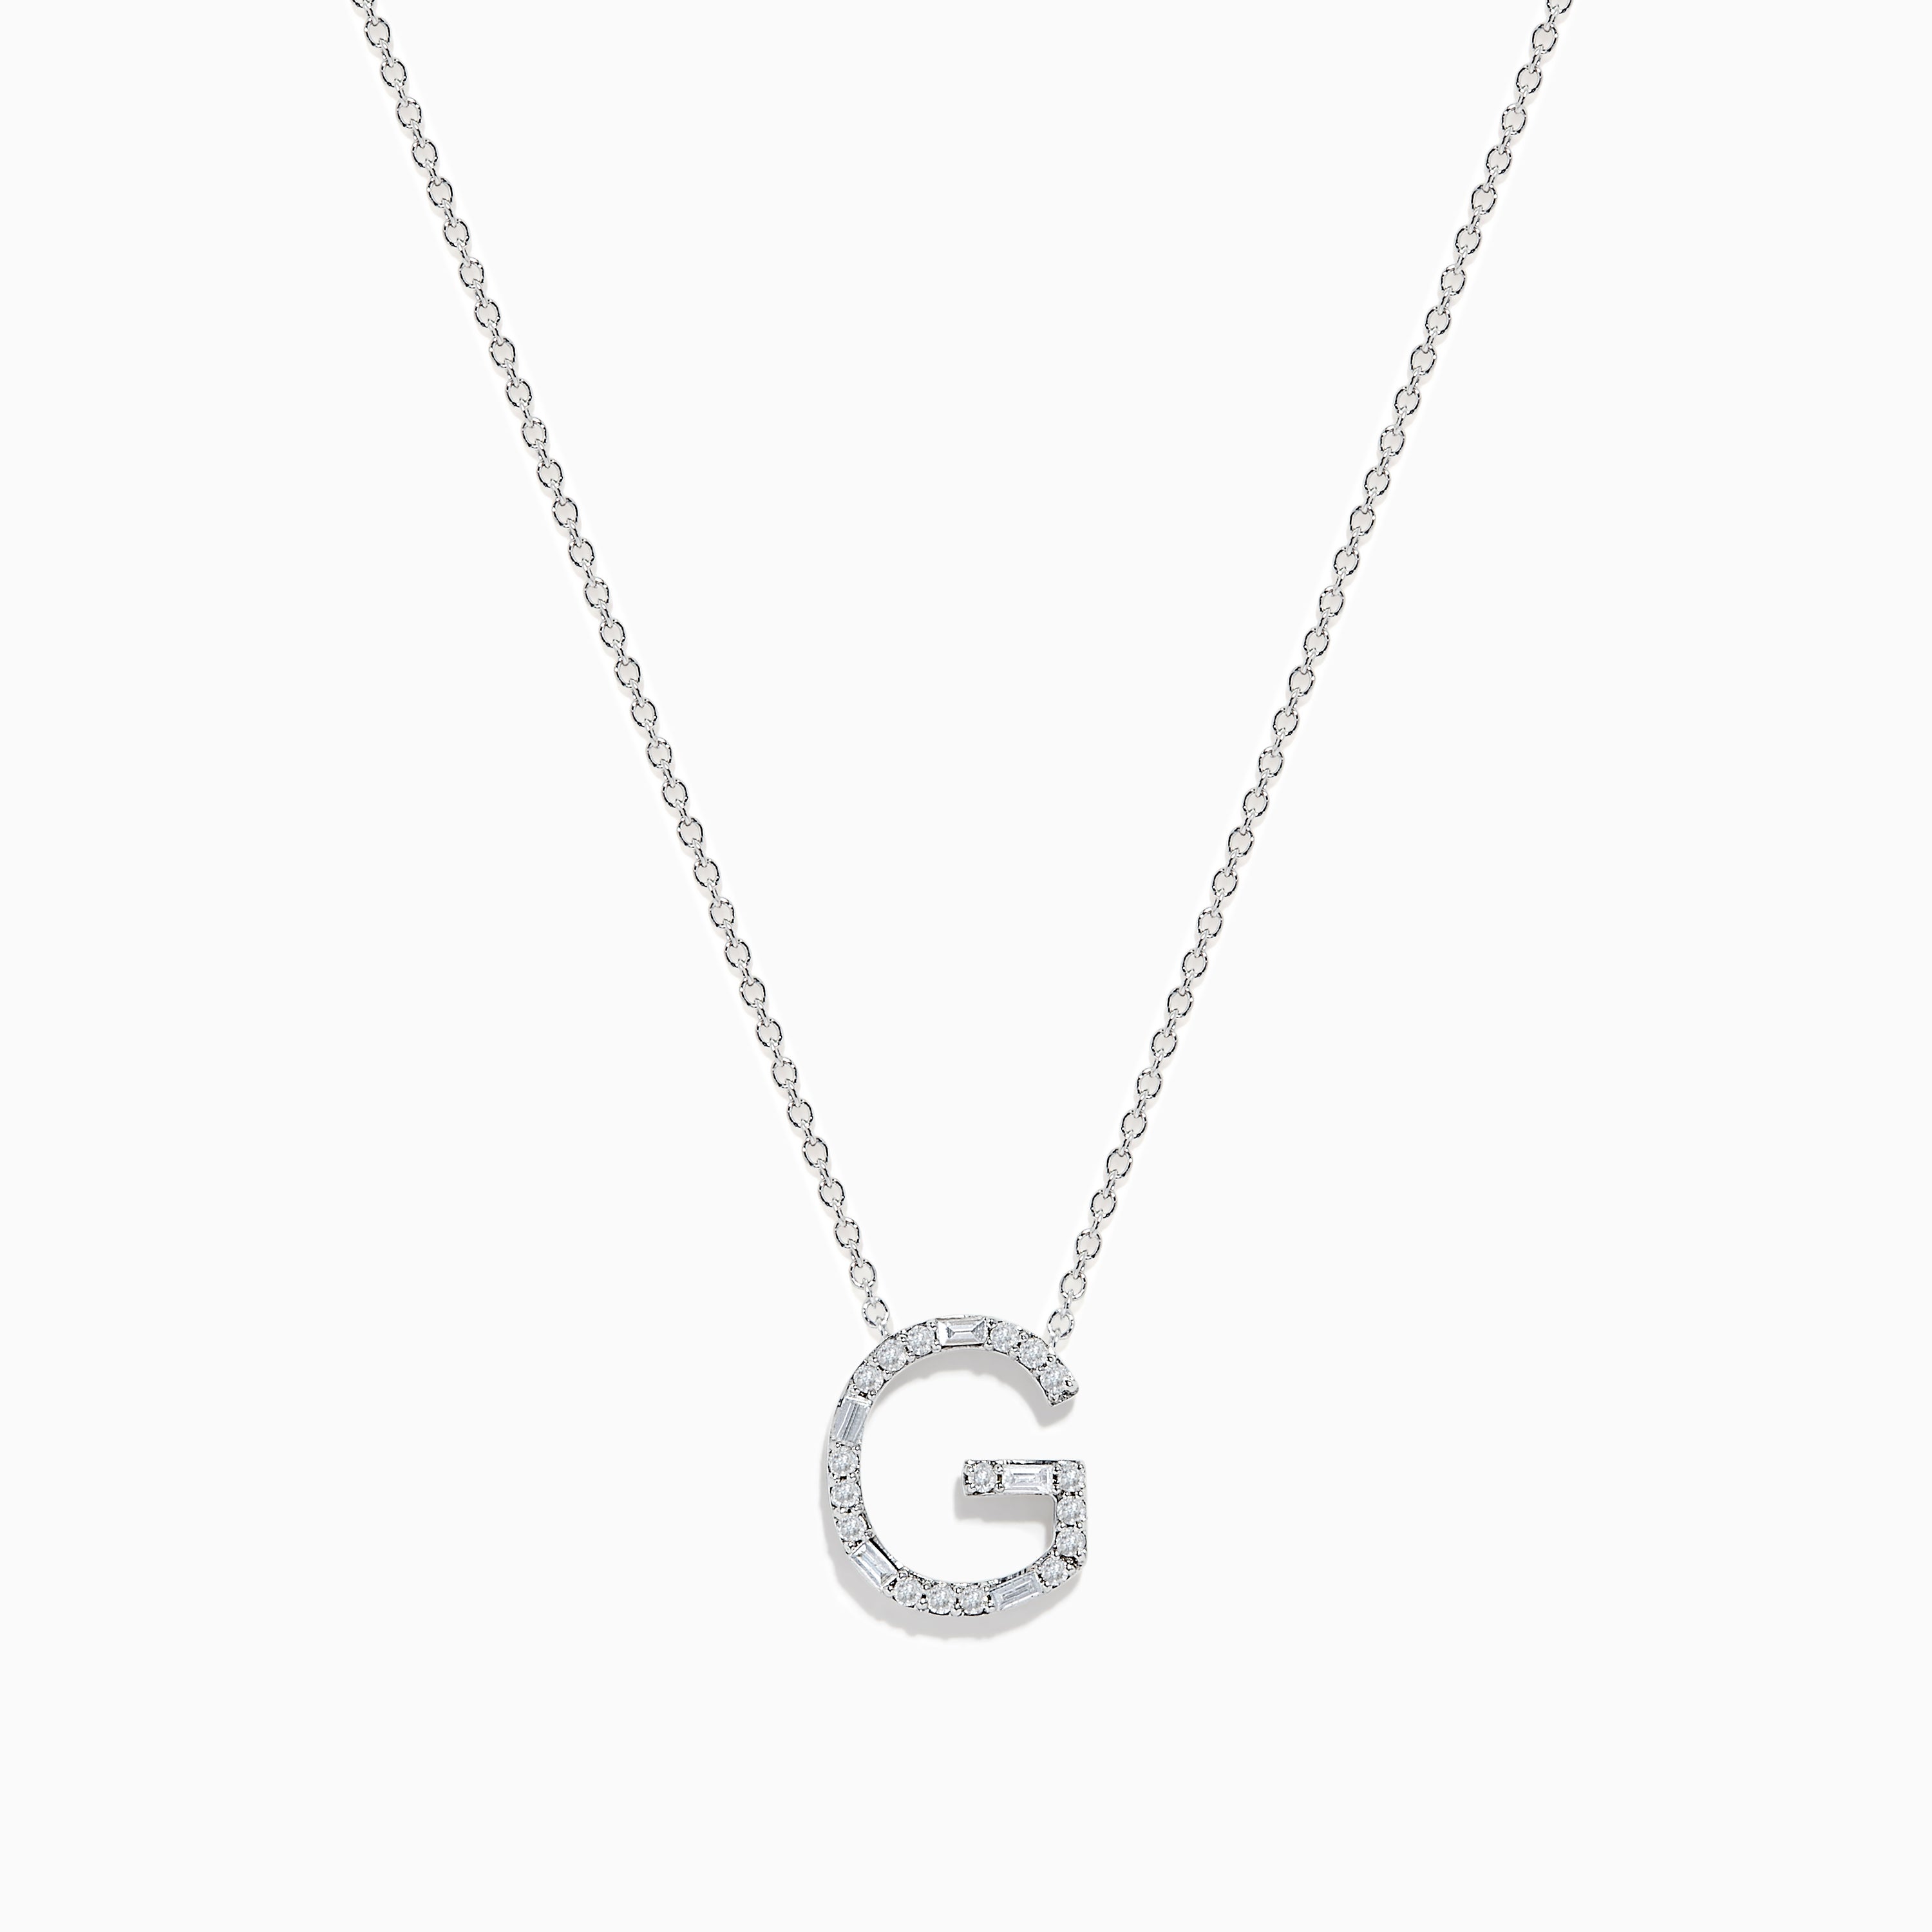 Gucci necklace in silver with boule and blue GG enamel pendant